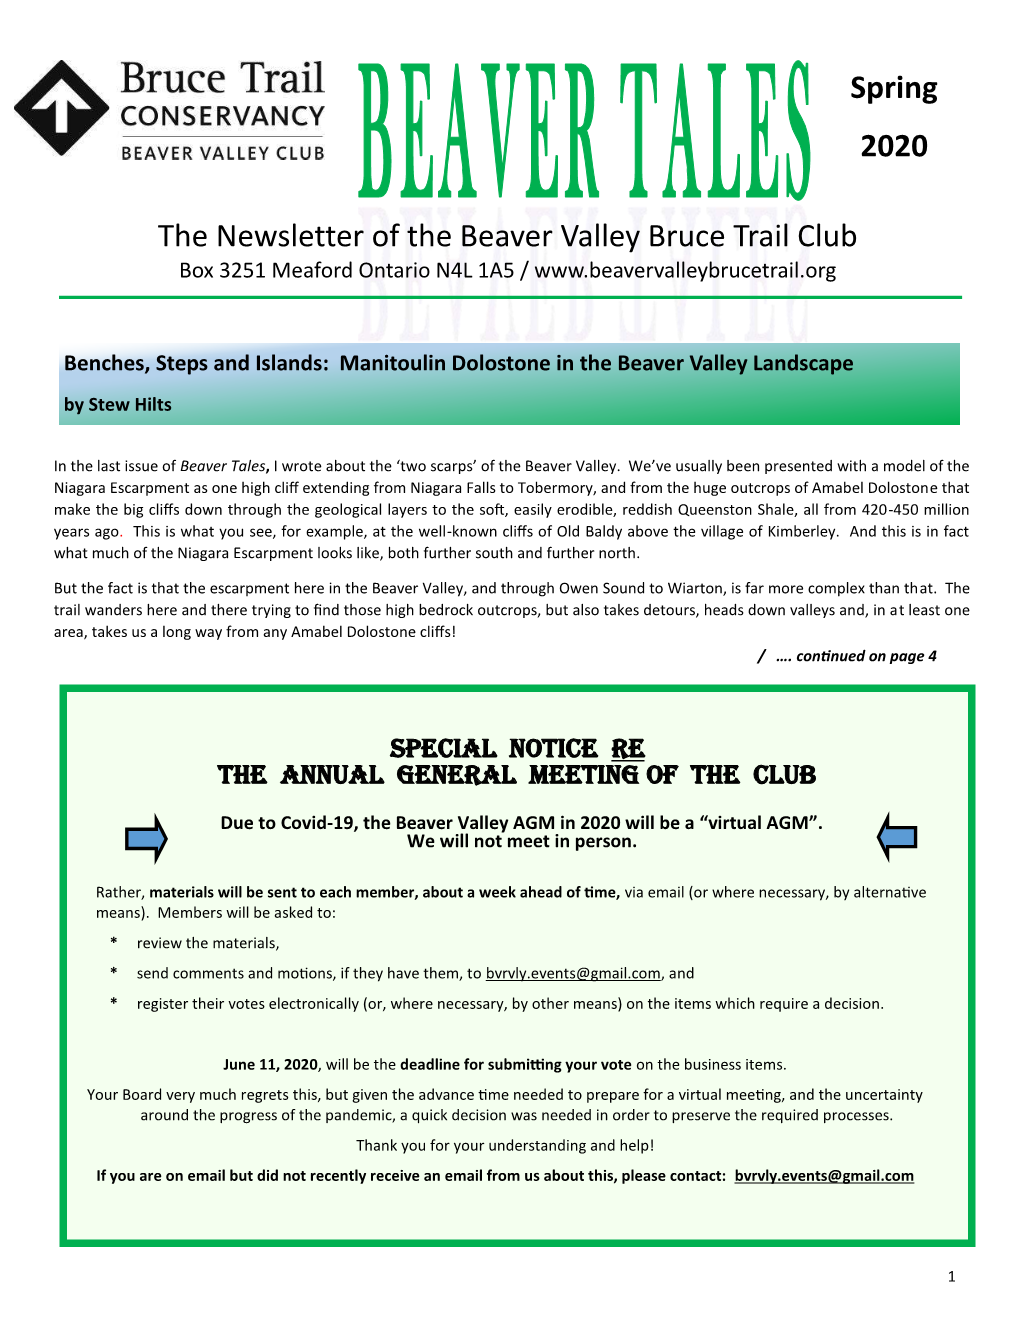 The Newsletter of the Beaver Valley Bruce Trail Club Spring 2020